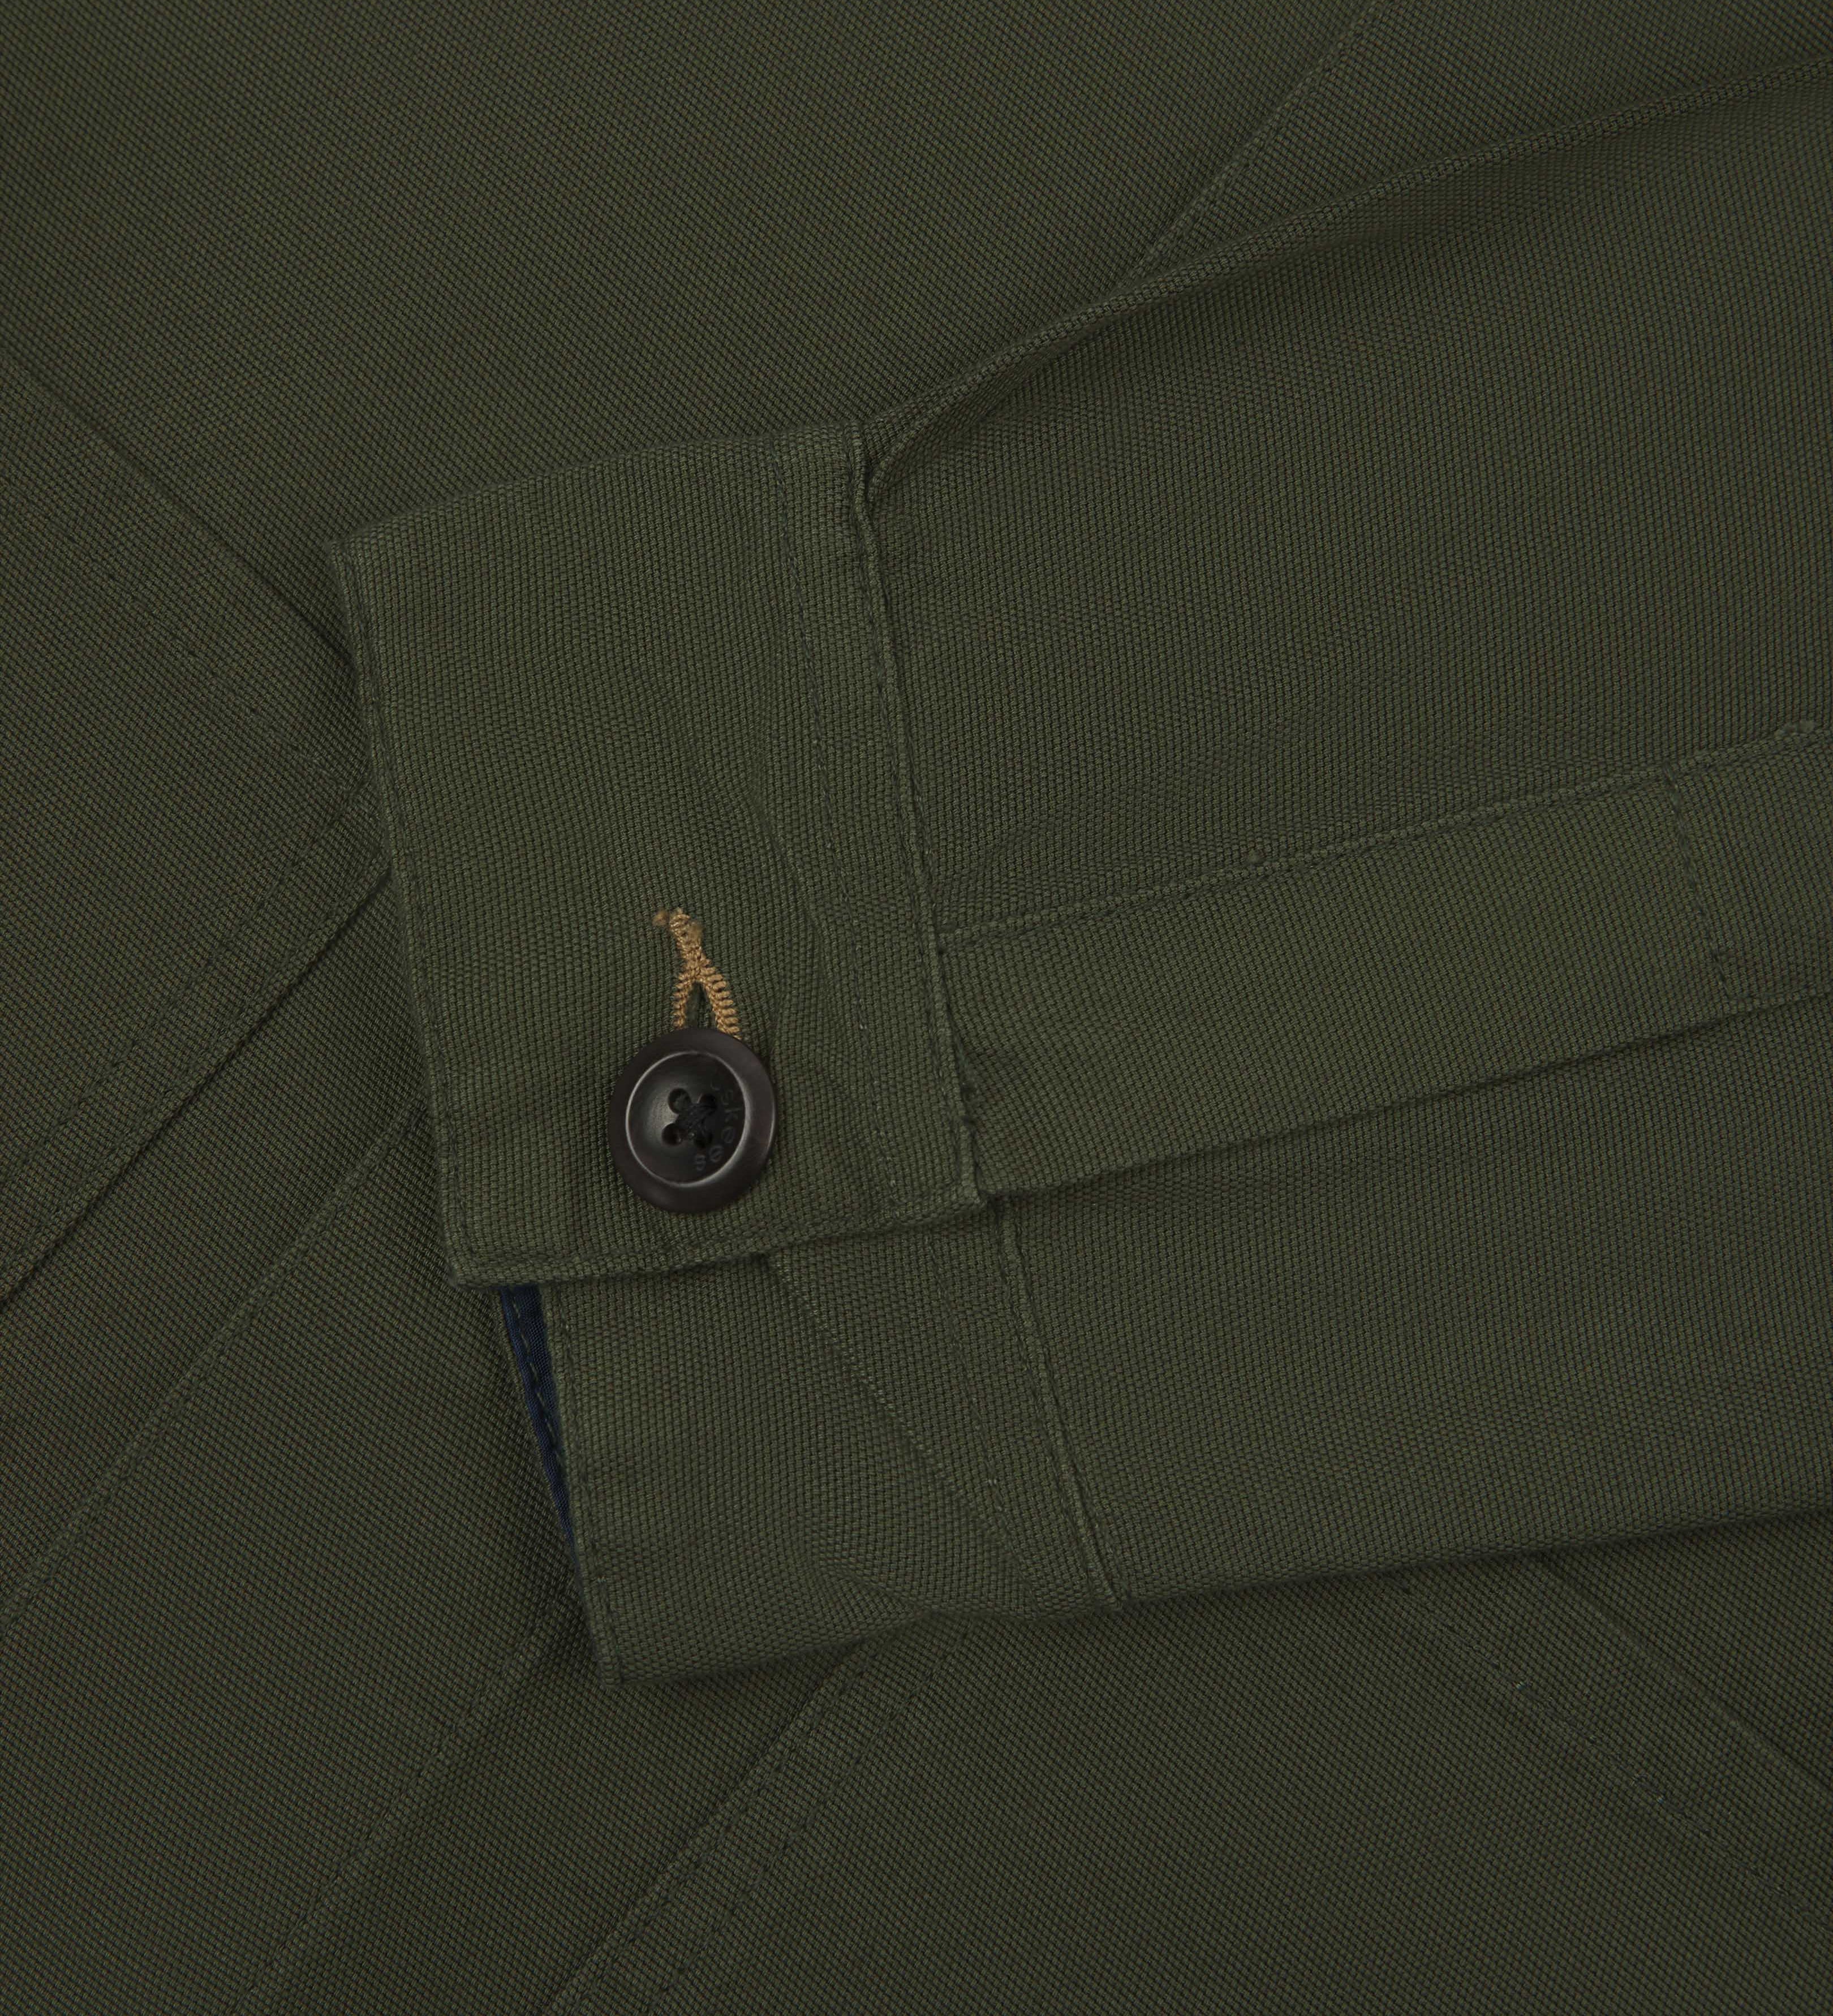 Front close up view of uskees men's dark green overshirt with hidden buttons showing buttoned cuff, sleeve and pockets.